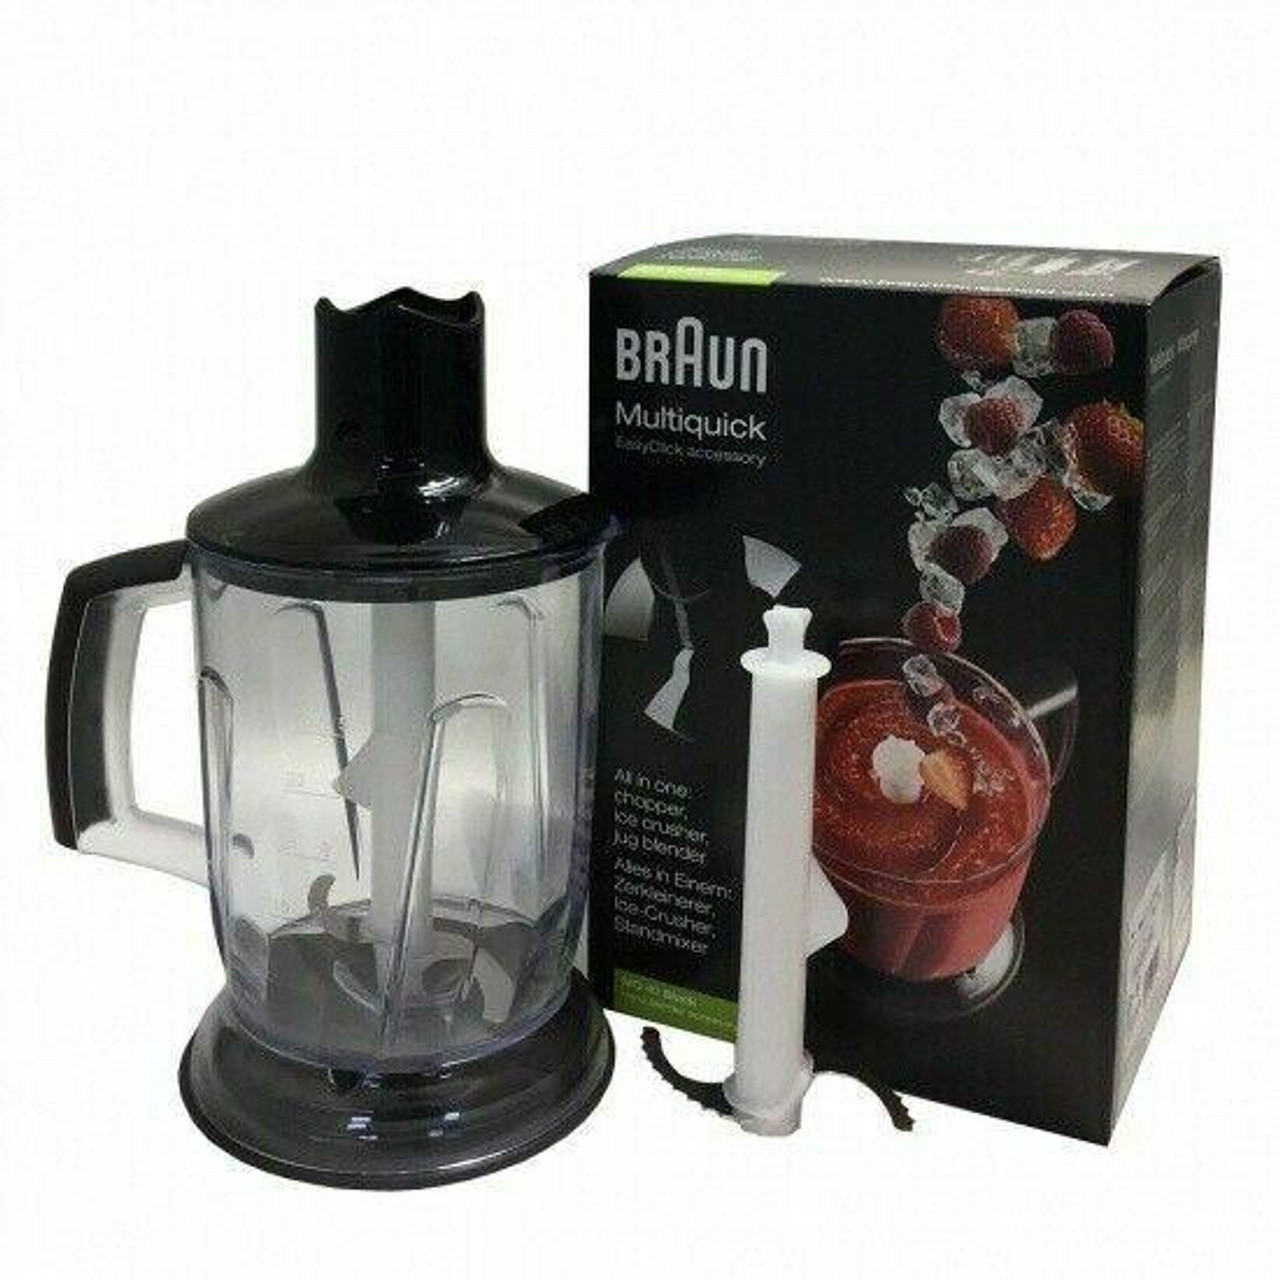 Braun MultiQuick 3 Hand Blender MQ-3048 700w with Spice grinder, Beater,  Chopper and Ice Crusher